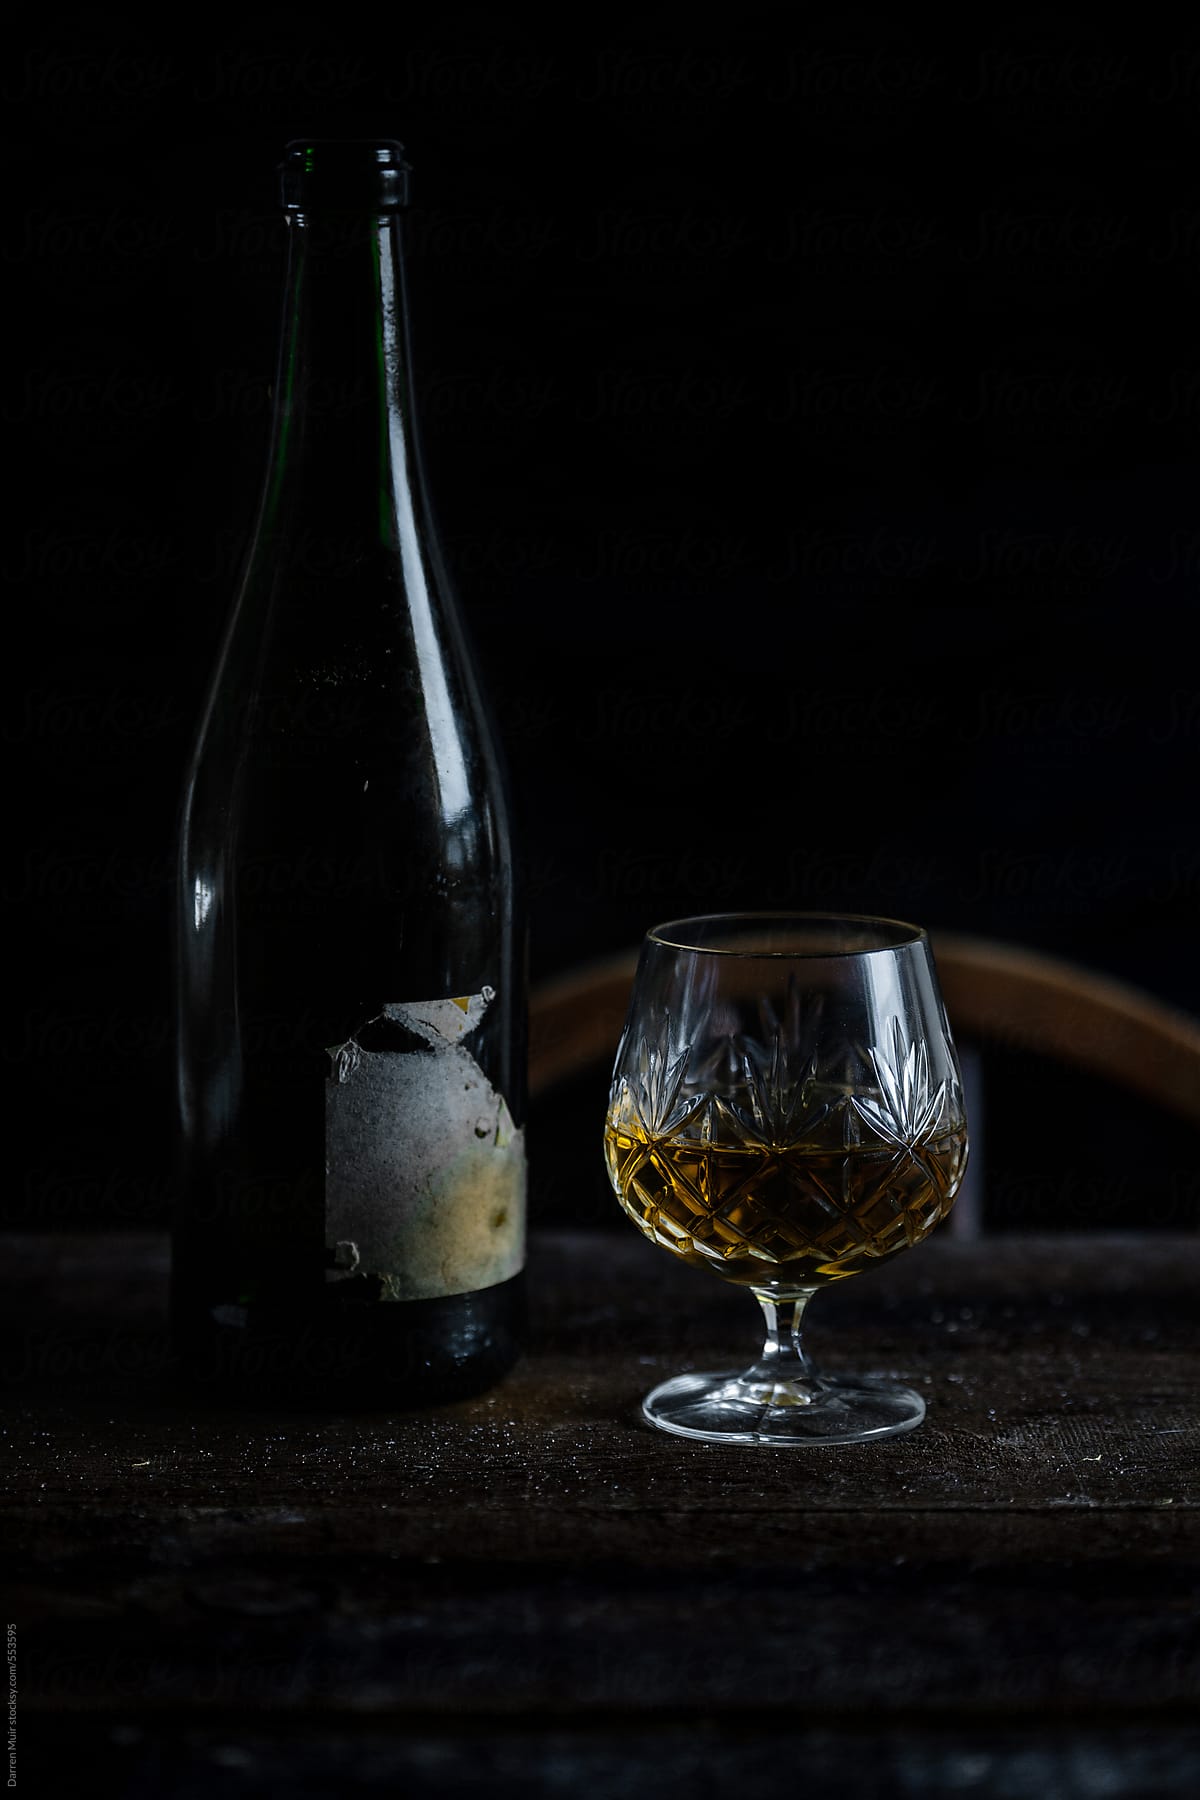 Vintage sherry bottle and crystal glass in natural low light setting.